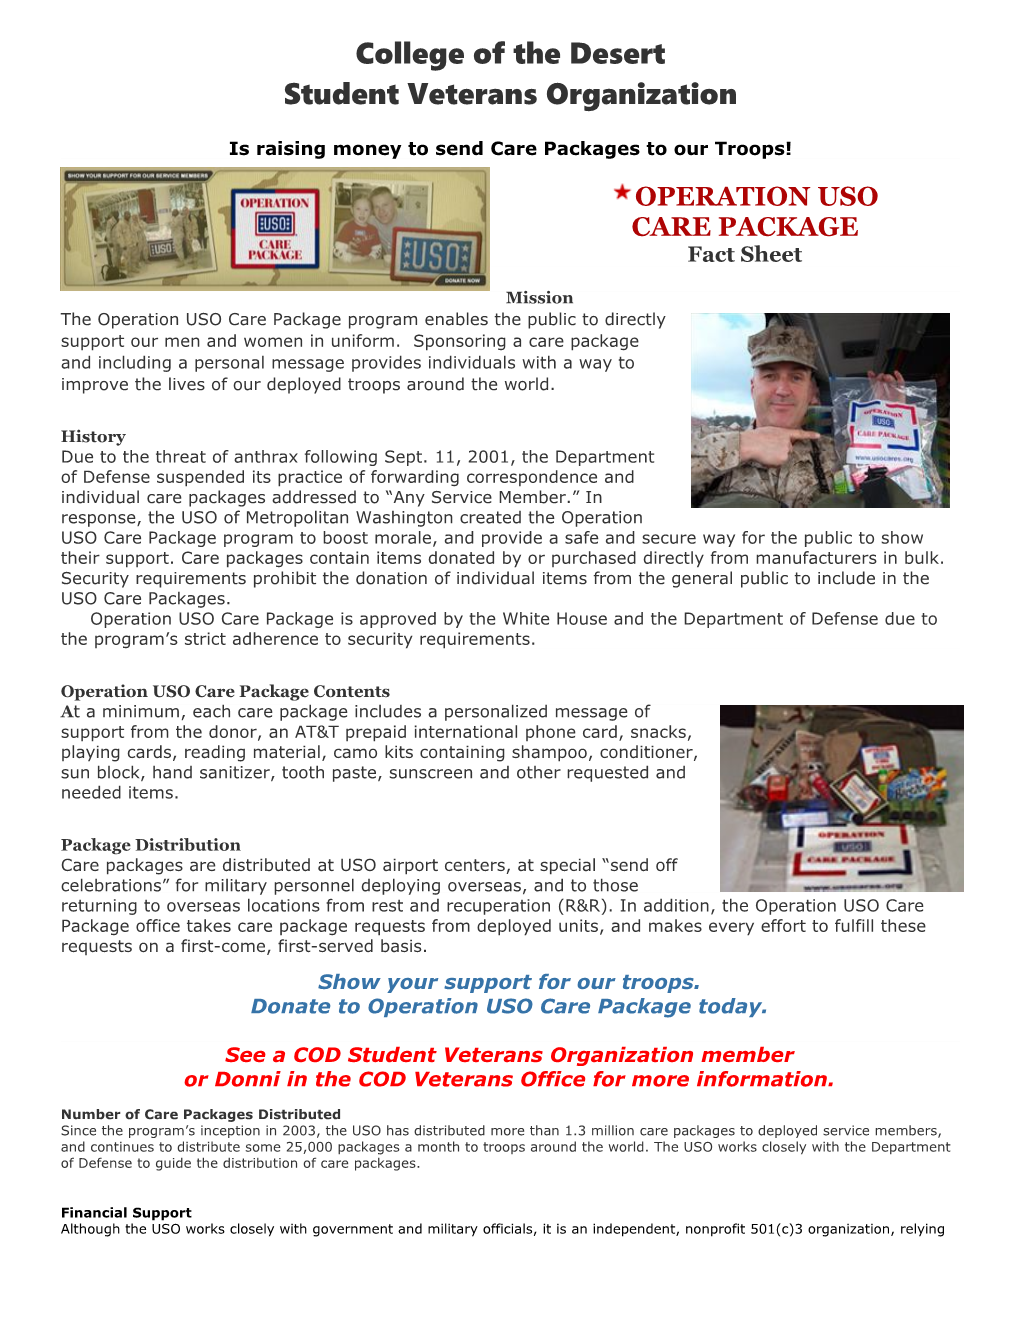 Is Raising Money to Send Care Packages to Our Troops!